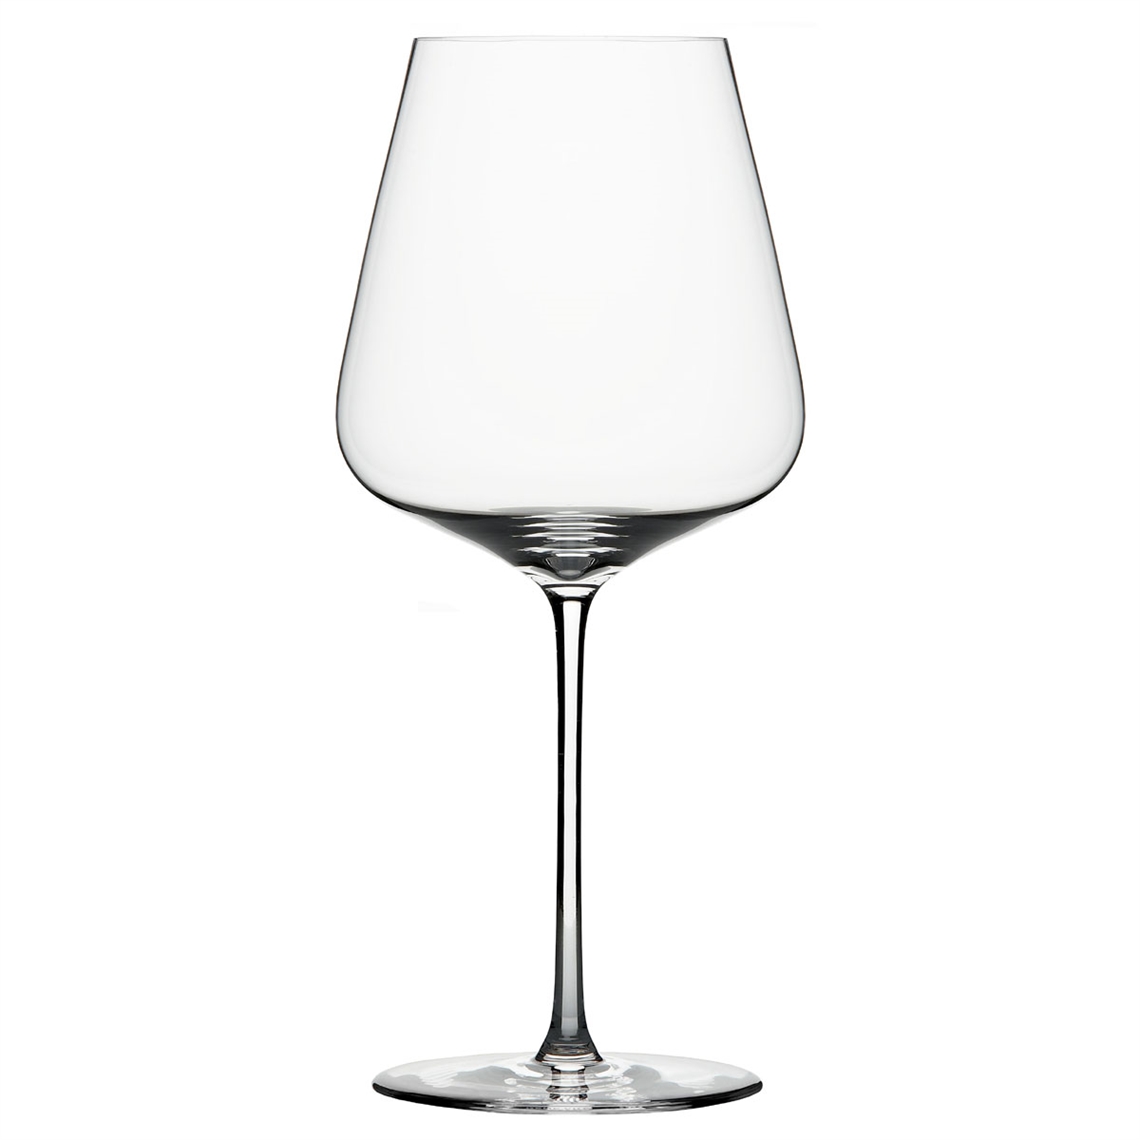 View more wine glasses by region and grape from our Premium Mouth Blown Glassware range